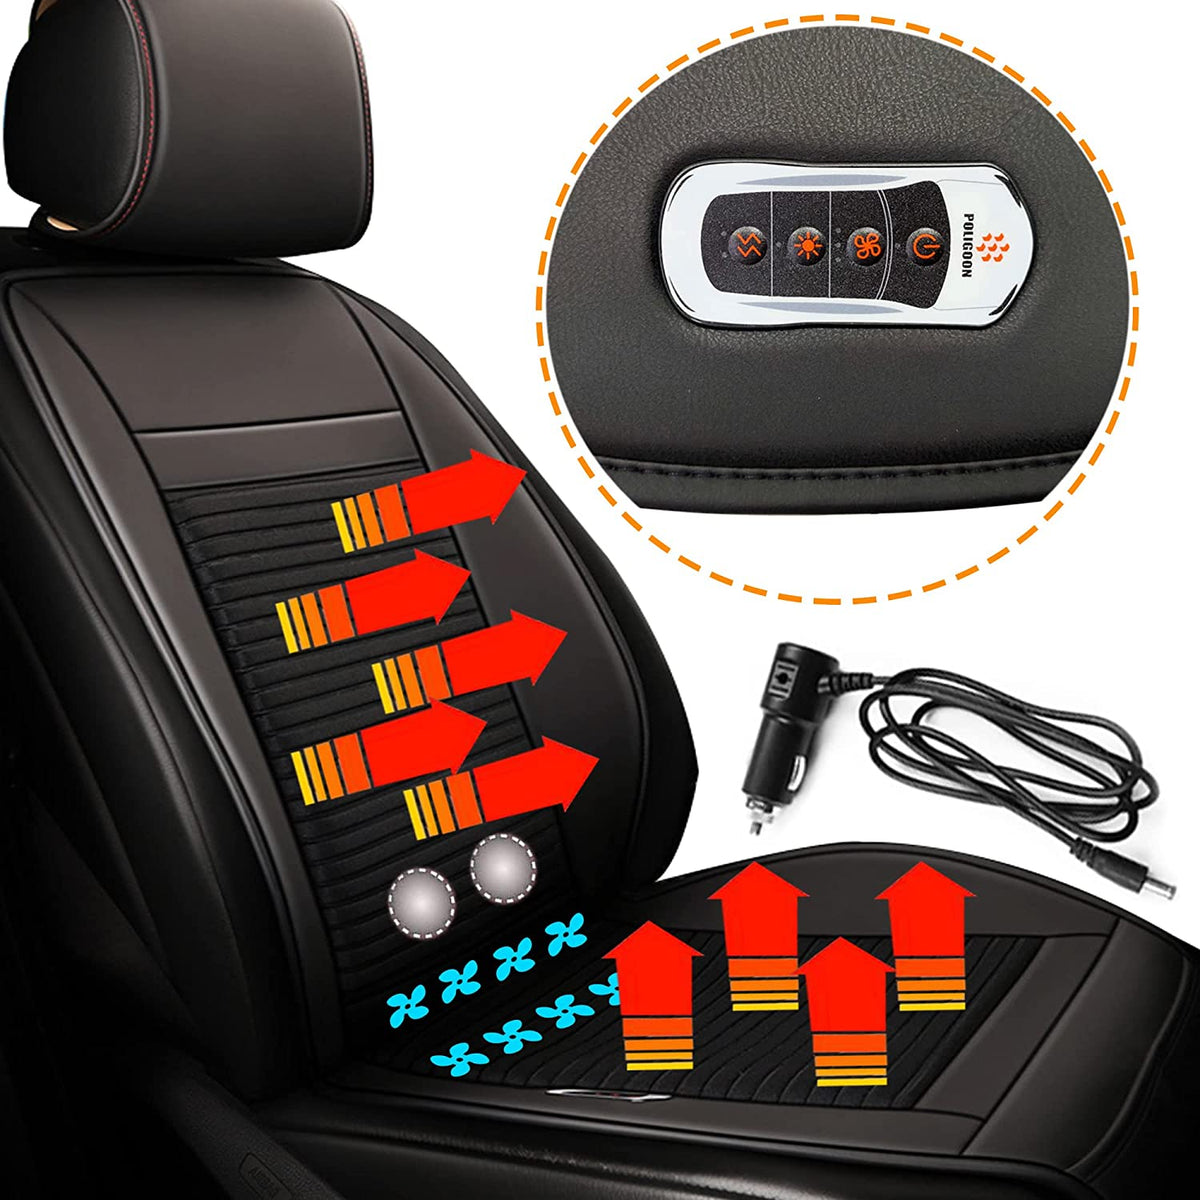 Fochutech Heated Car Seat Covers Cooling Car Seat Cushion with Massage Seat  12V Front Seat Driver Seat Cooler Warmer Heater PU Leather Car Seat